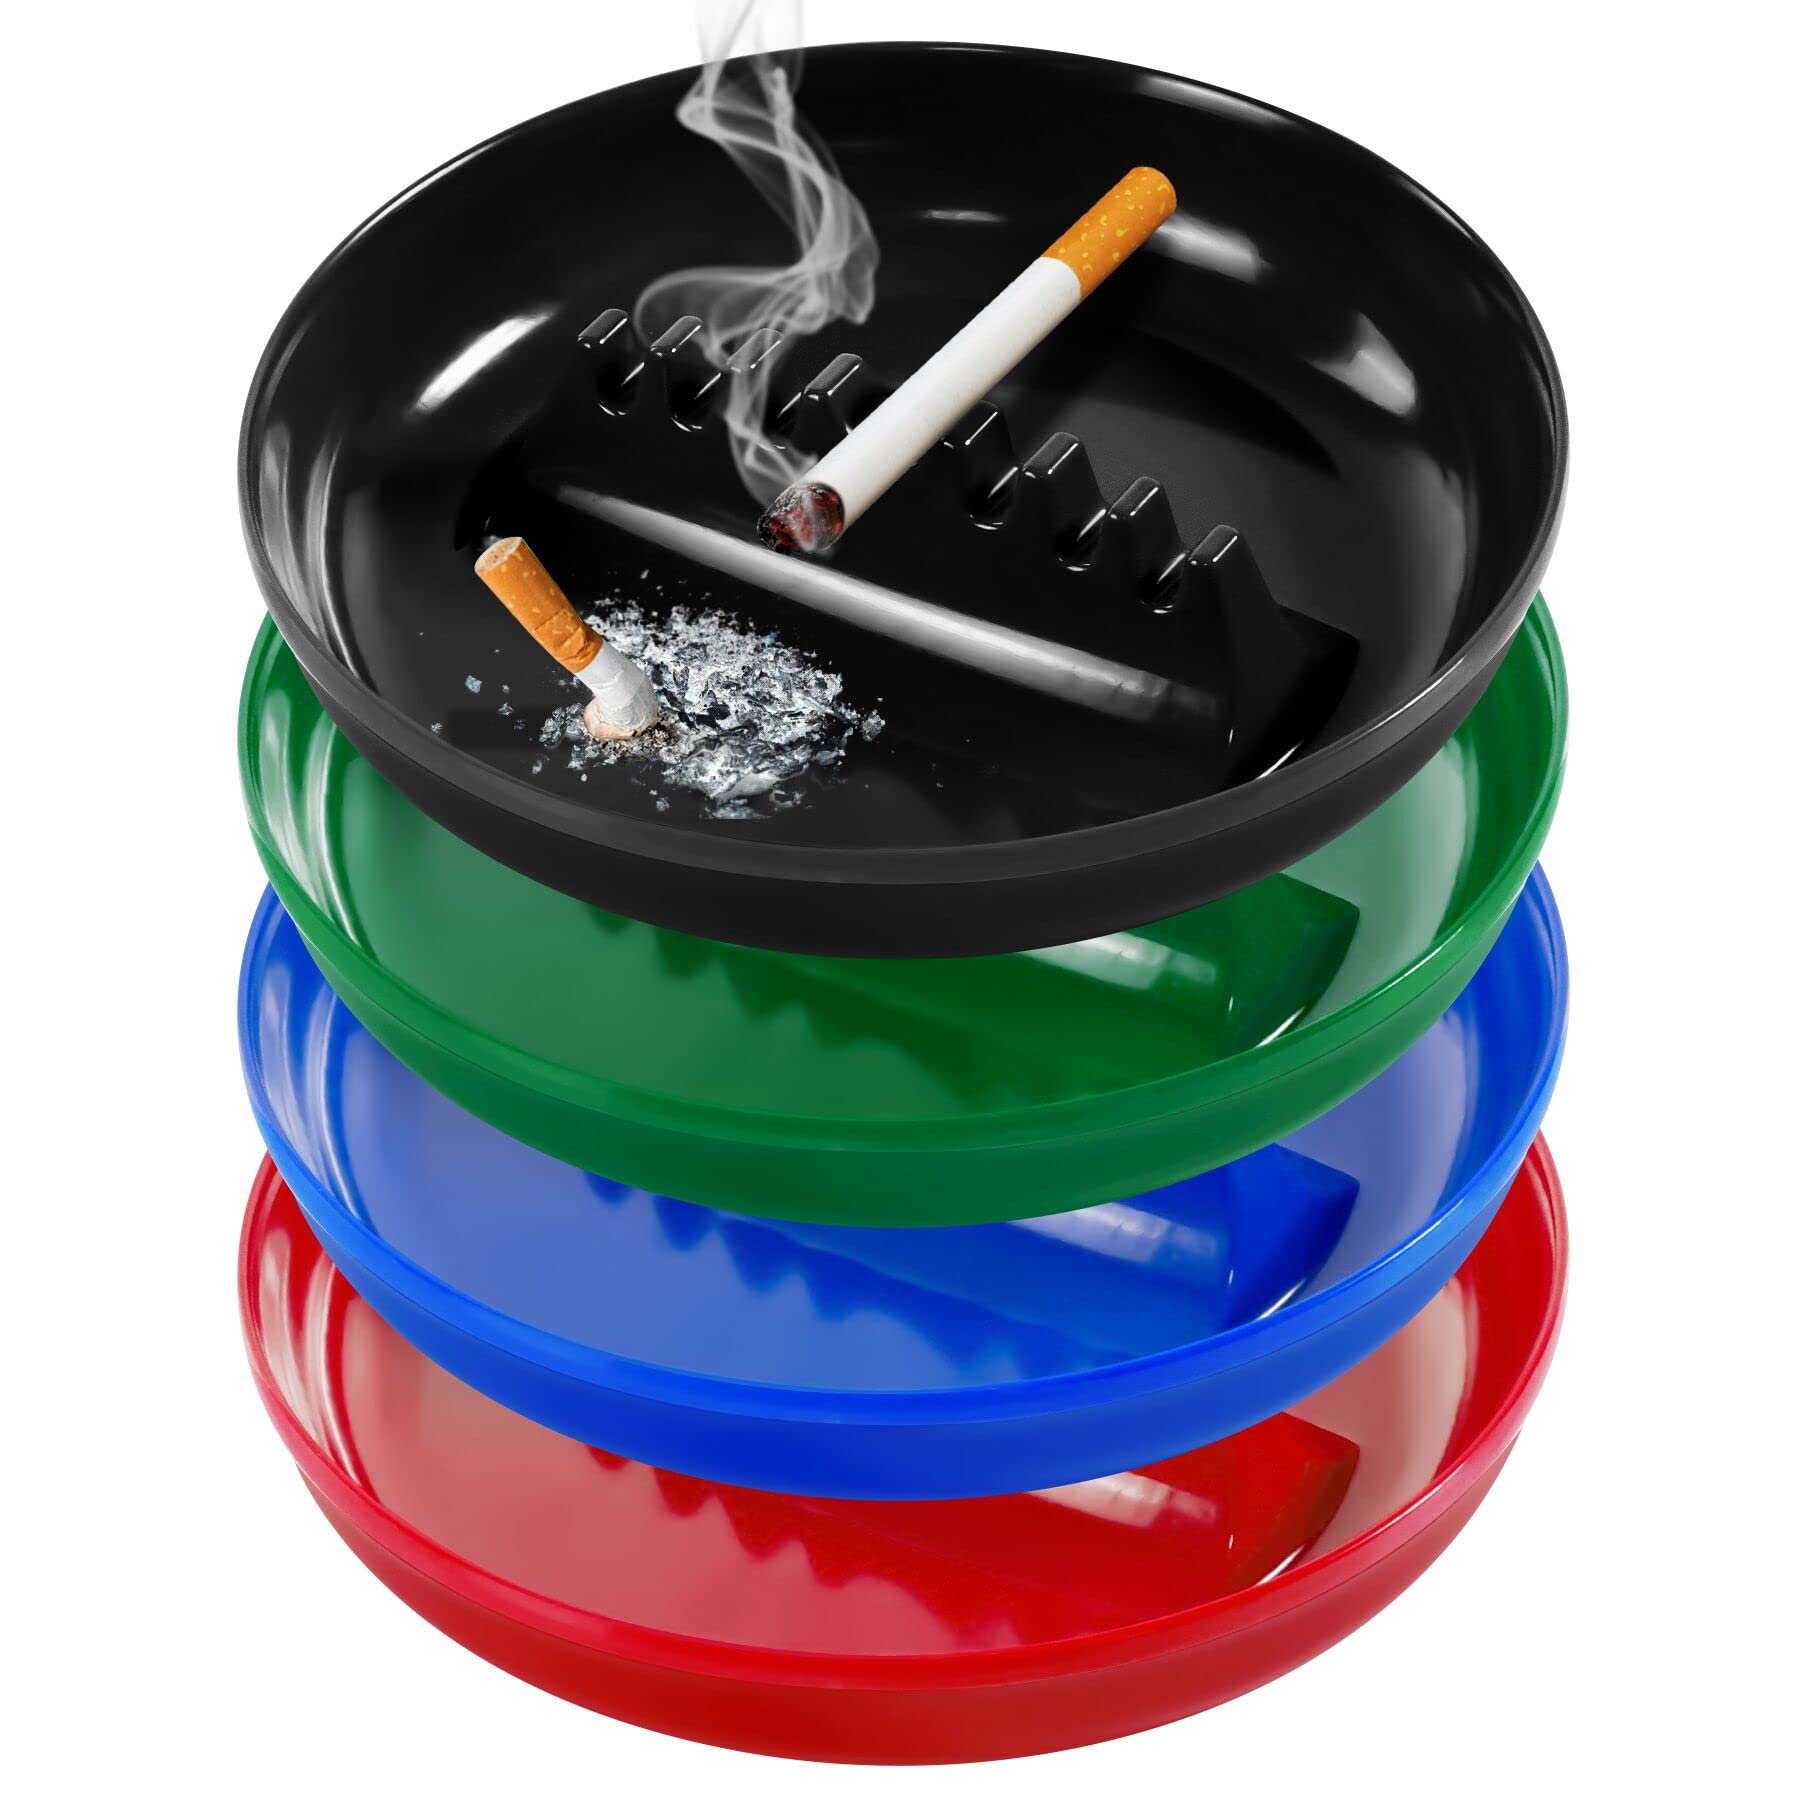 Grovind Plastic Ashtrays for Cigarettes and Cigars, Indoor Outdoor Ash Tray Large Size Tabletop Ashtray Decor for Home Office Restaurant Patio Bar - Pack of 4 Colors Mixed (Black/Blue/Green/Red)